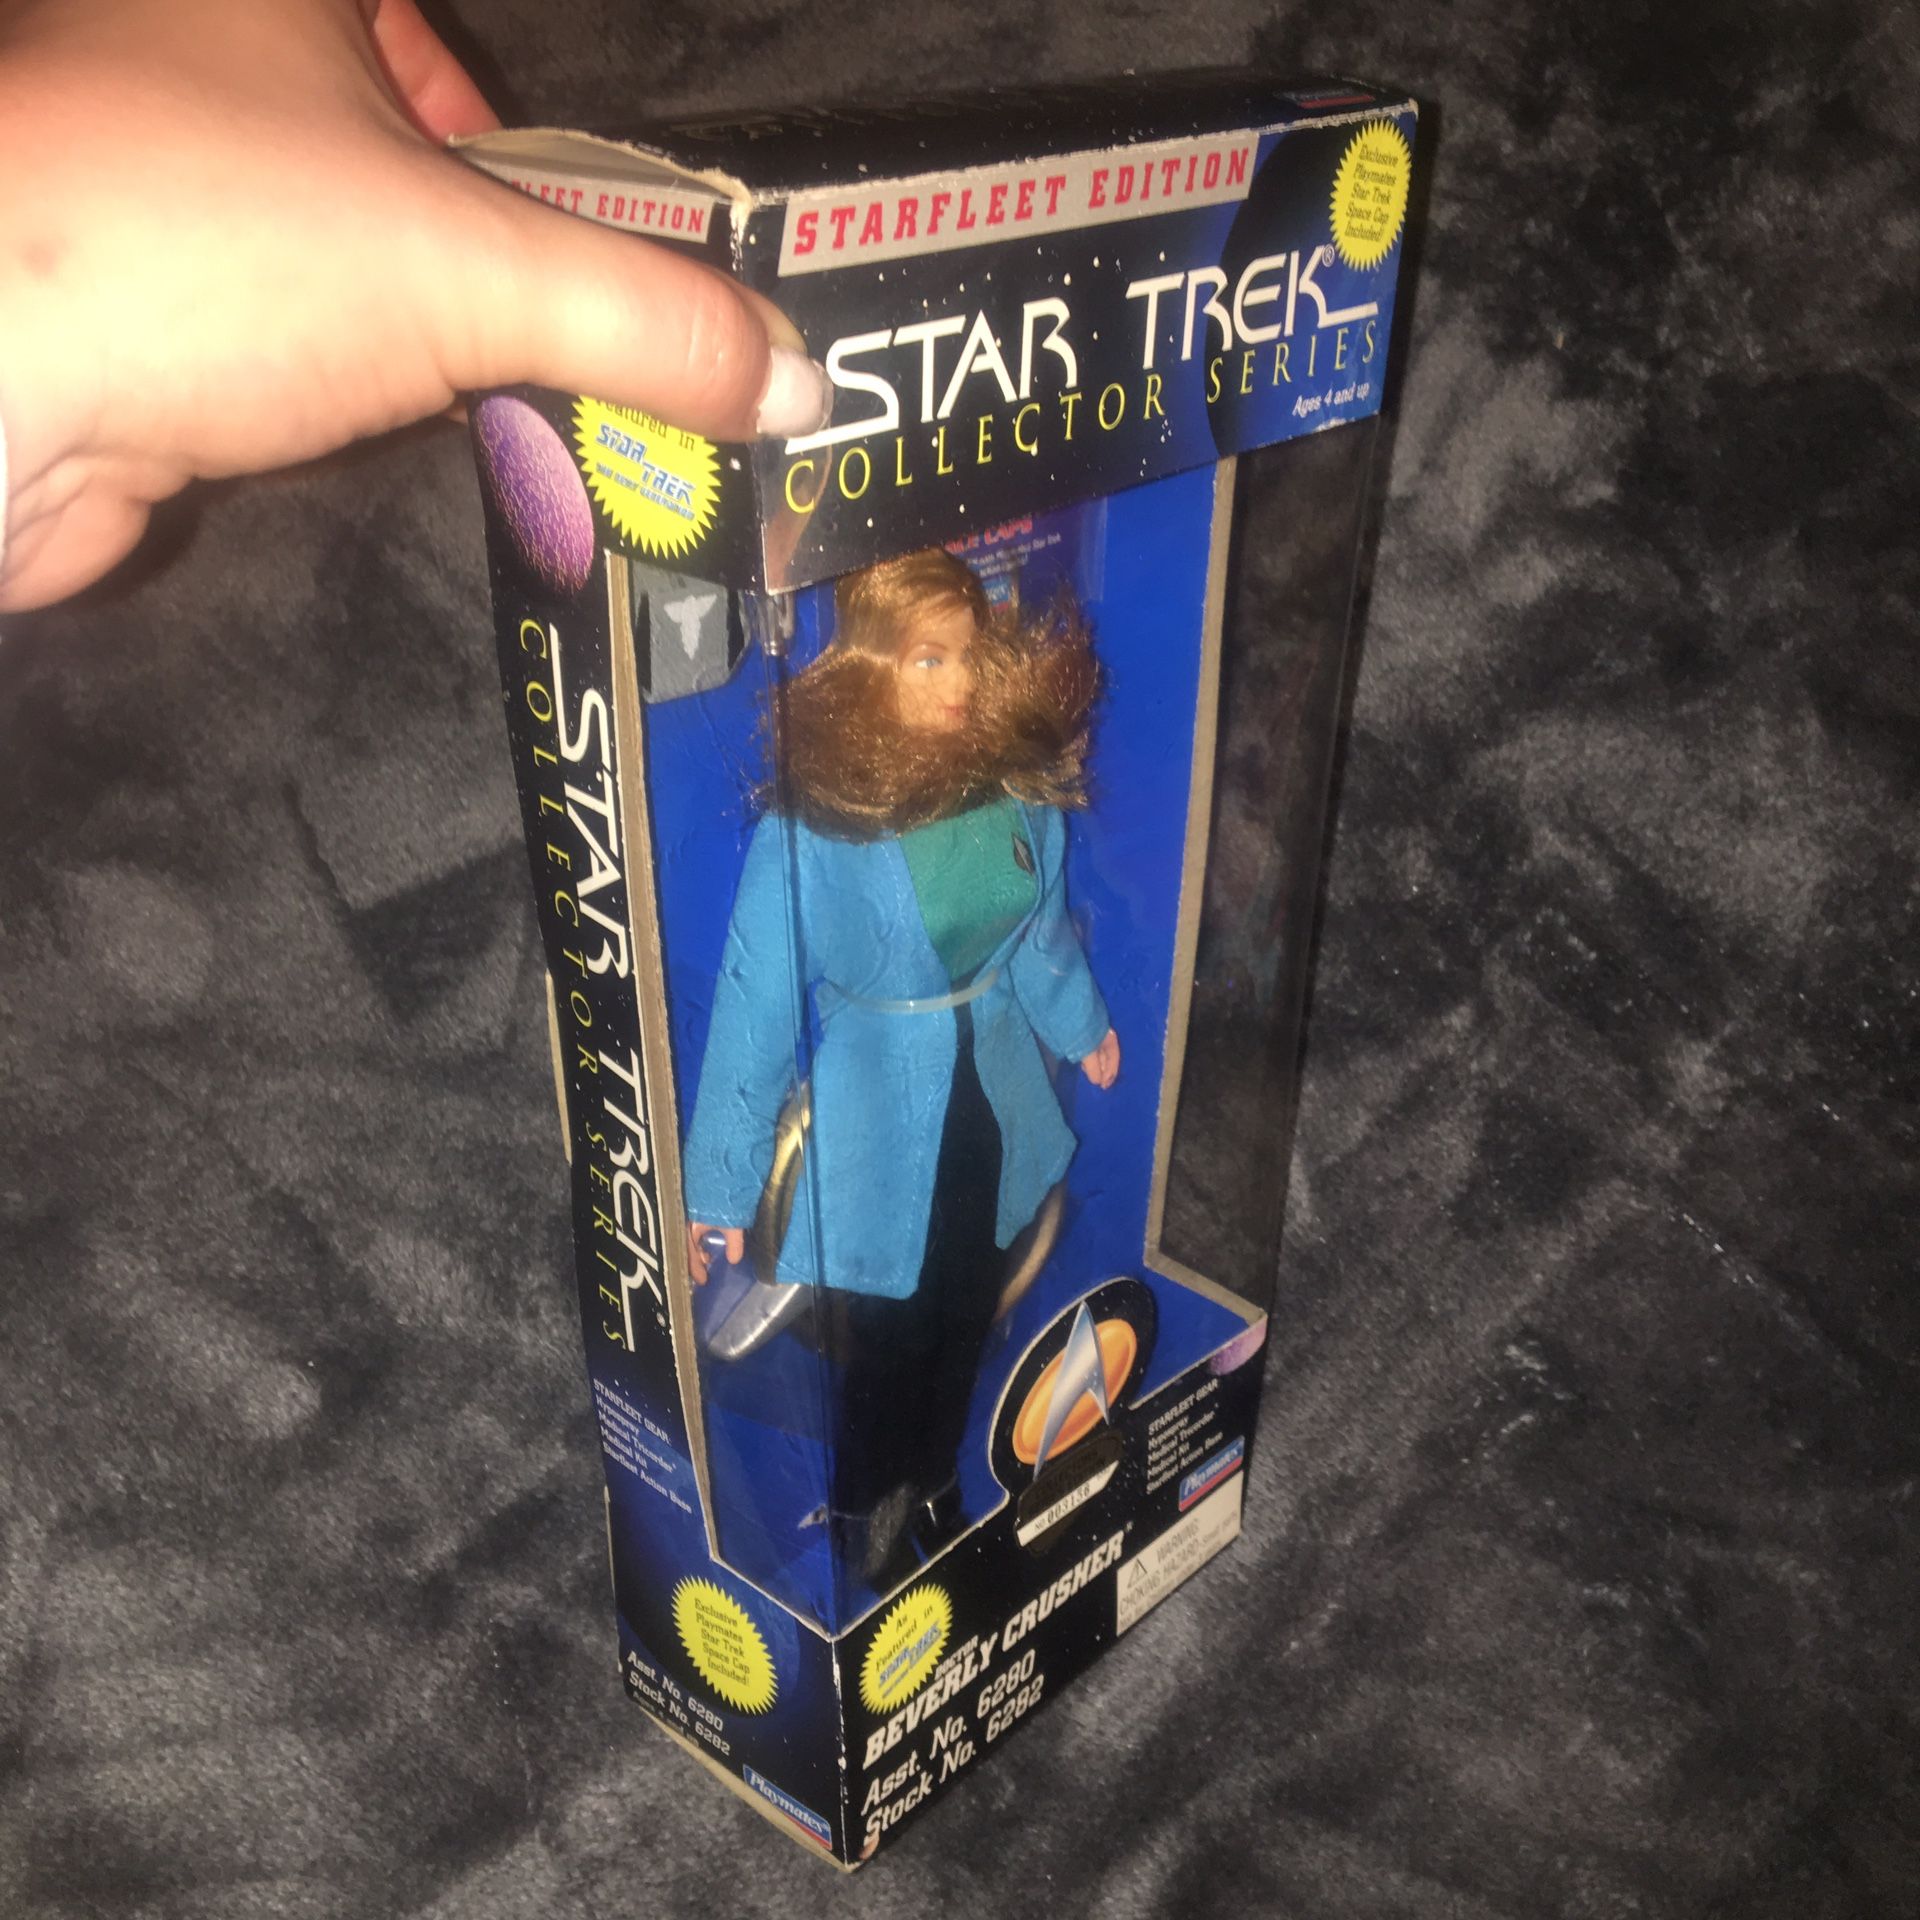 RARE VINTAGE STARFLEET EDITION *STAR TREK* COLLECTOR SERIES - DR. BEVERLY CRUSHER Action Figure Collectors Doll - Still Sealed New in Box!